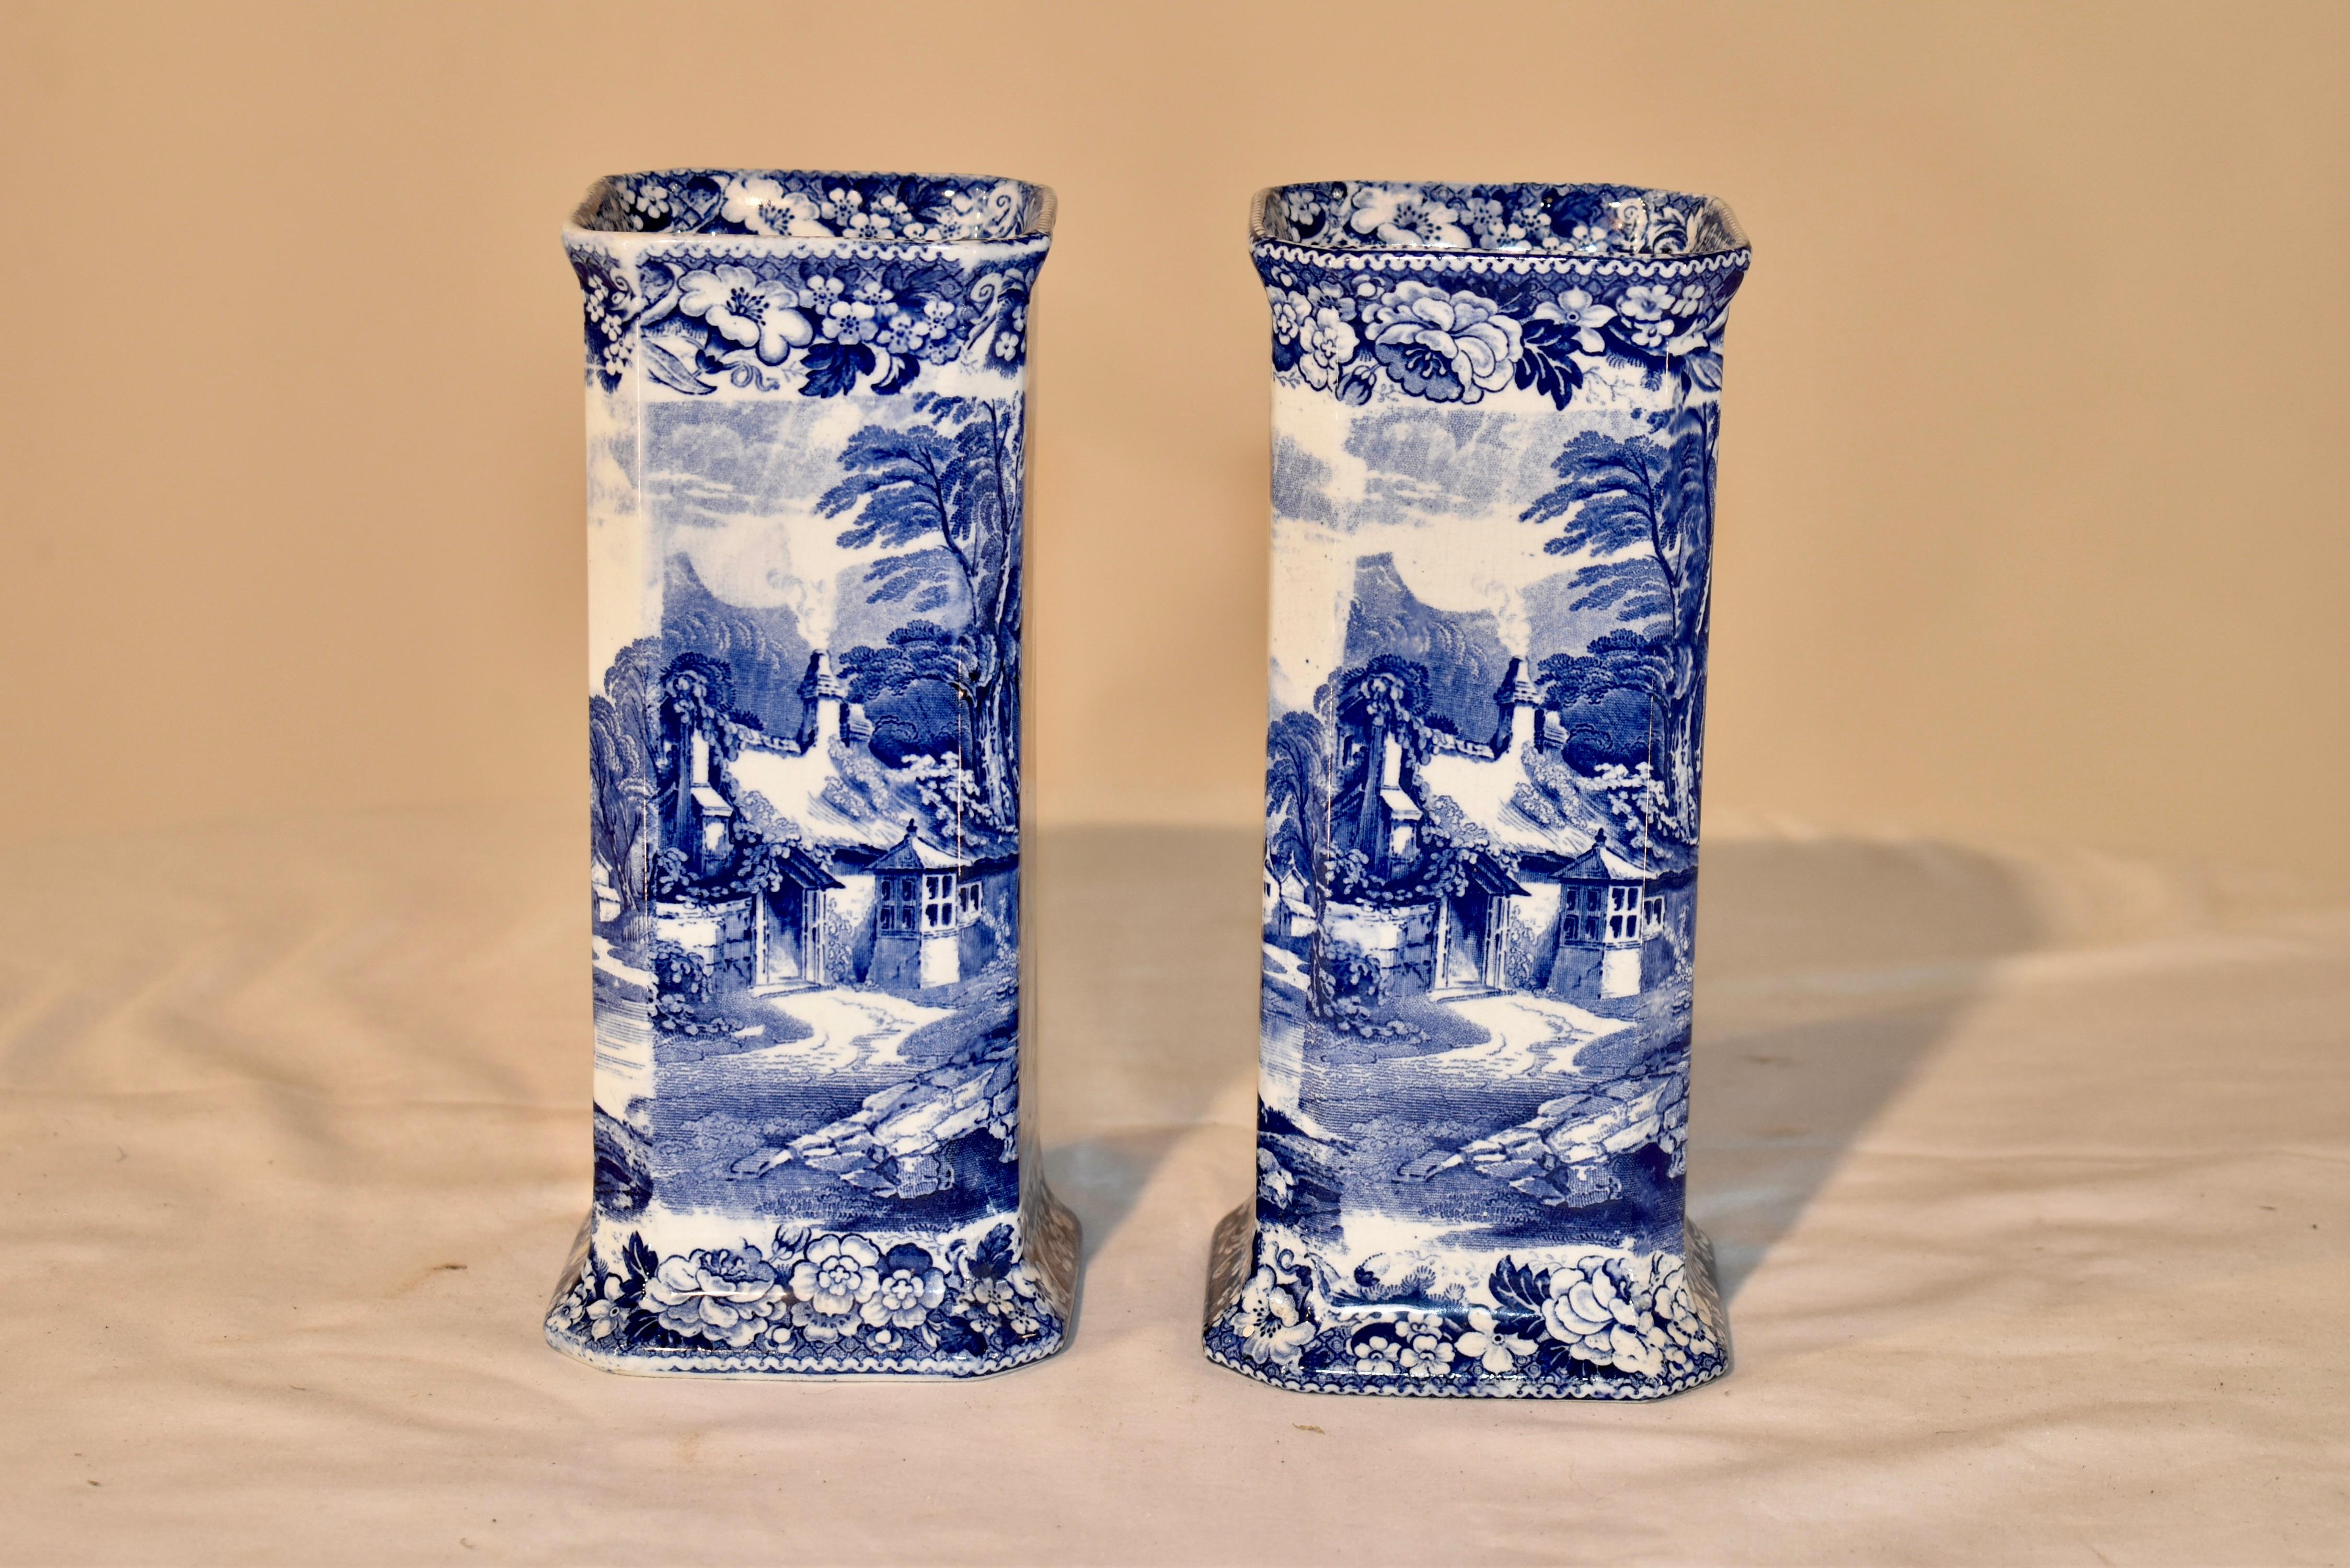 Pair of 19th century blue and white vases signed Pratt's Lake Scenery on the bases. They are lovely and unusual square shaped vases with gorgeous transfer ware decoration which depicts a cottage overlooking a lake and a family enjoying the outdoors.